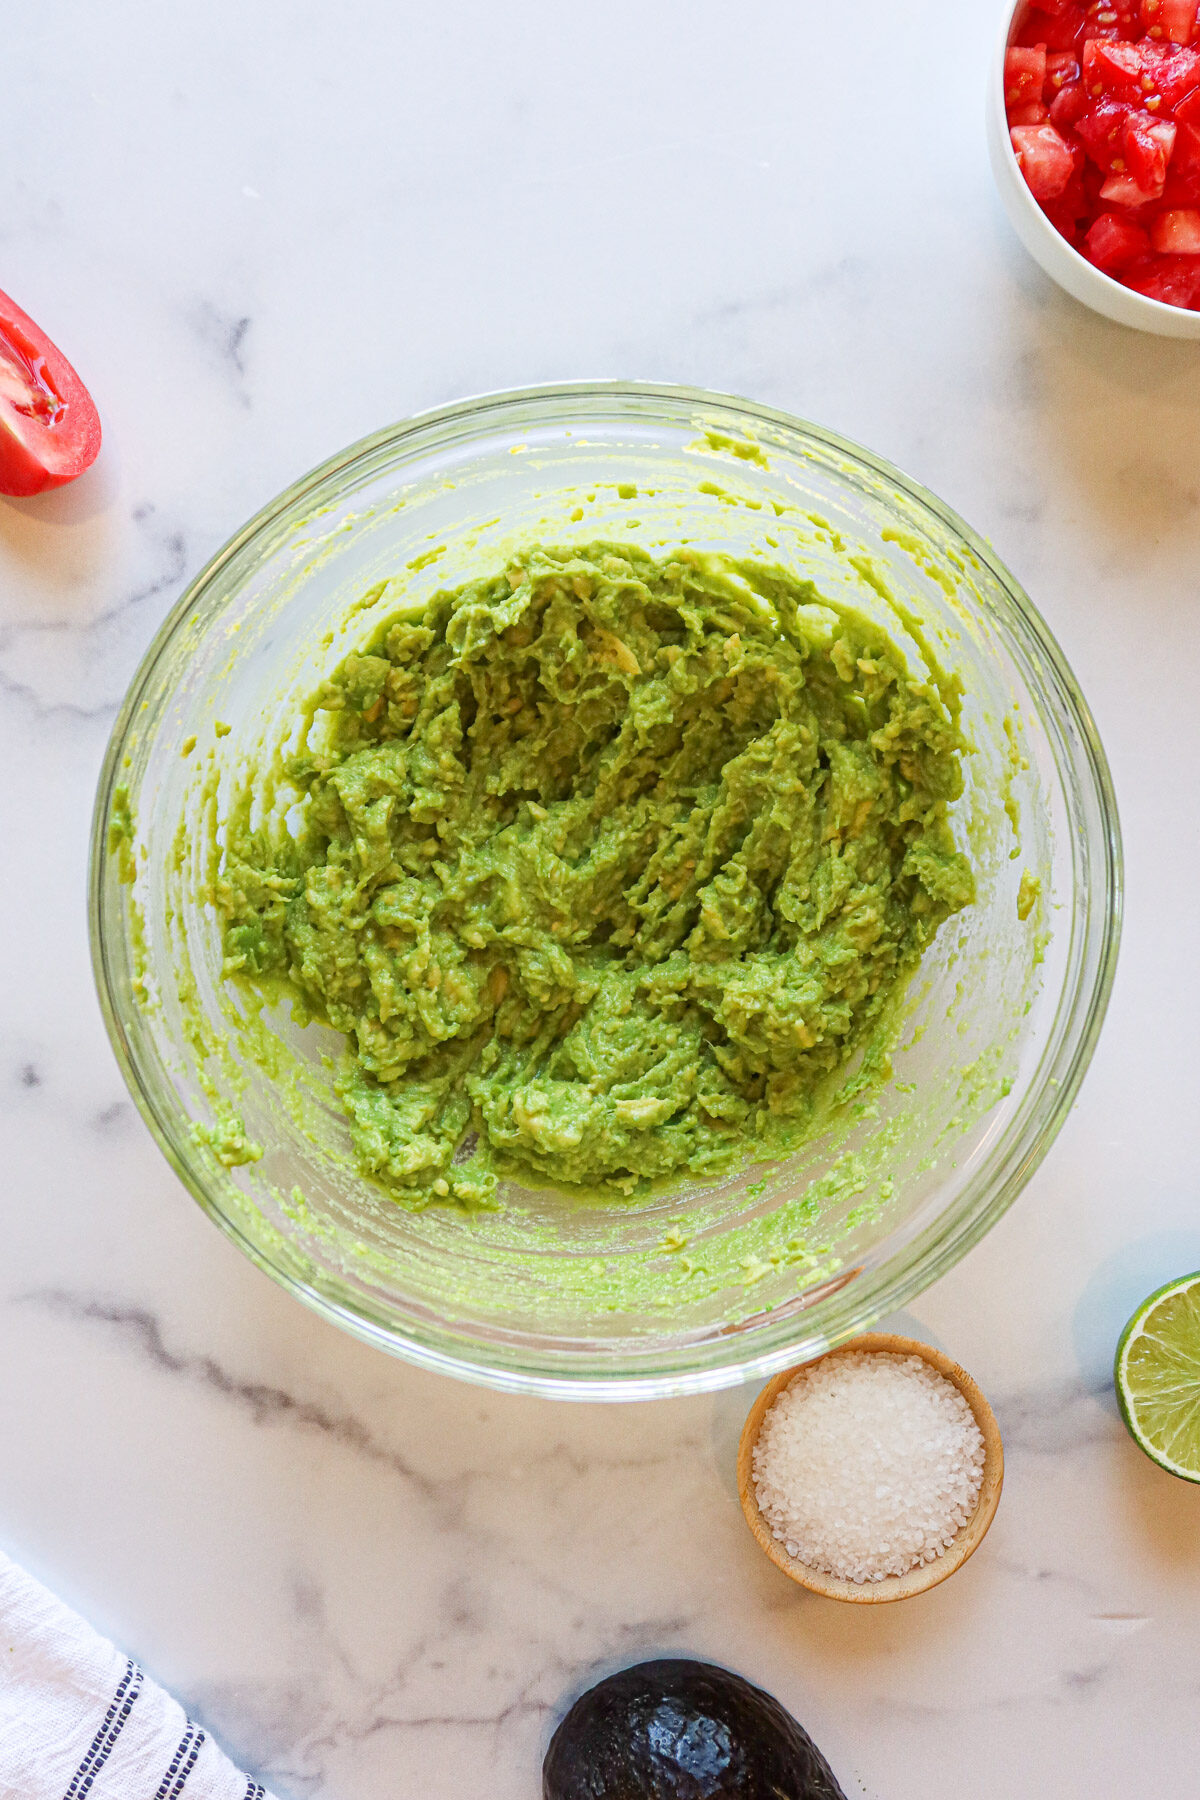 Mashed avocados in a glass mixing bowl.